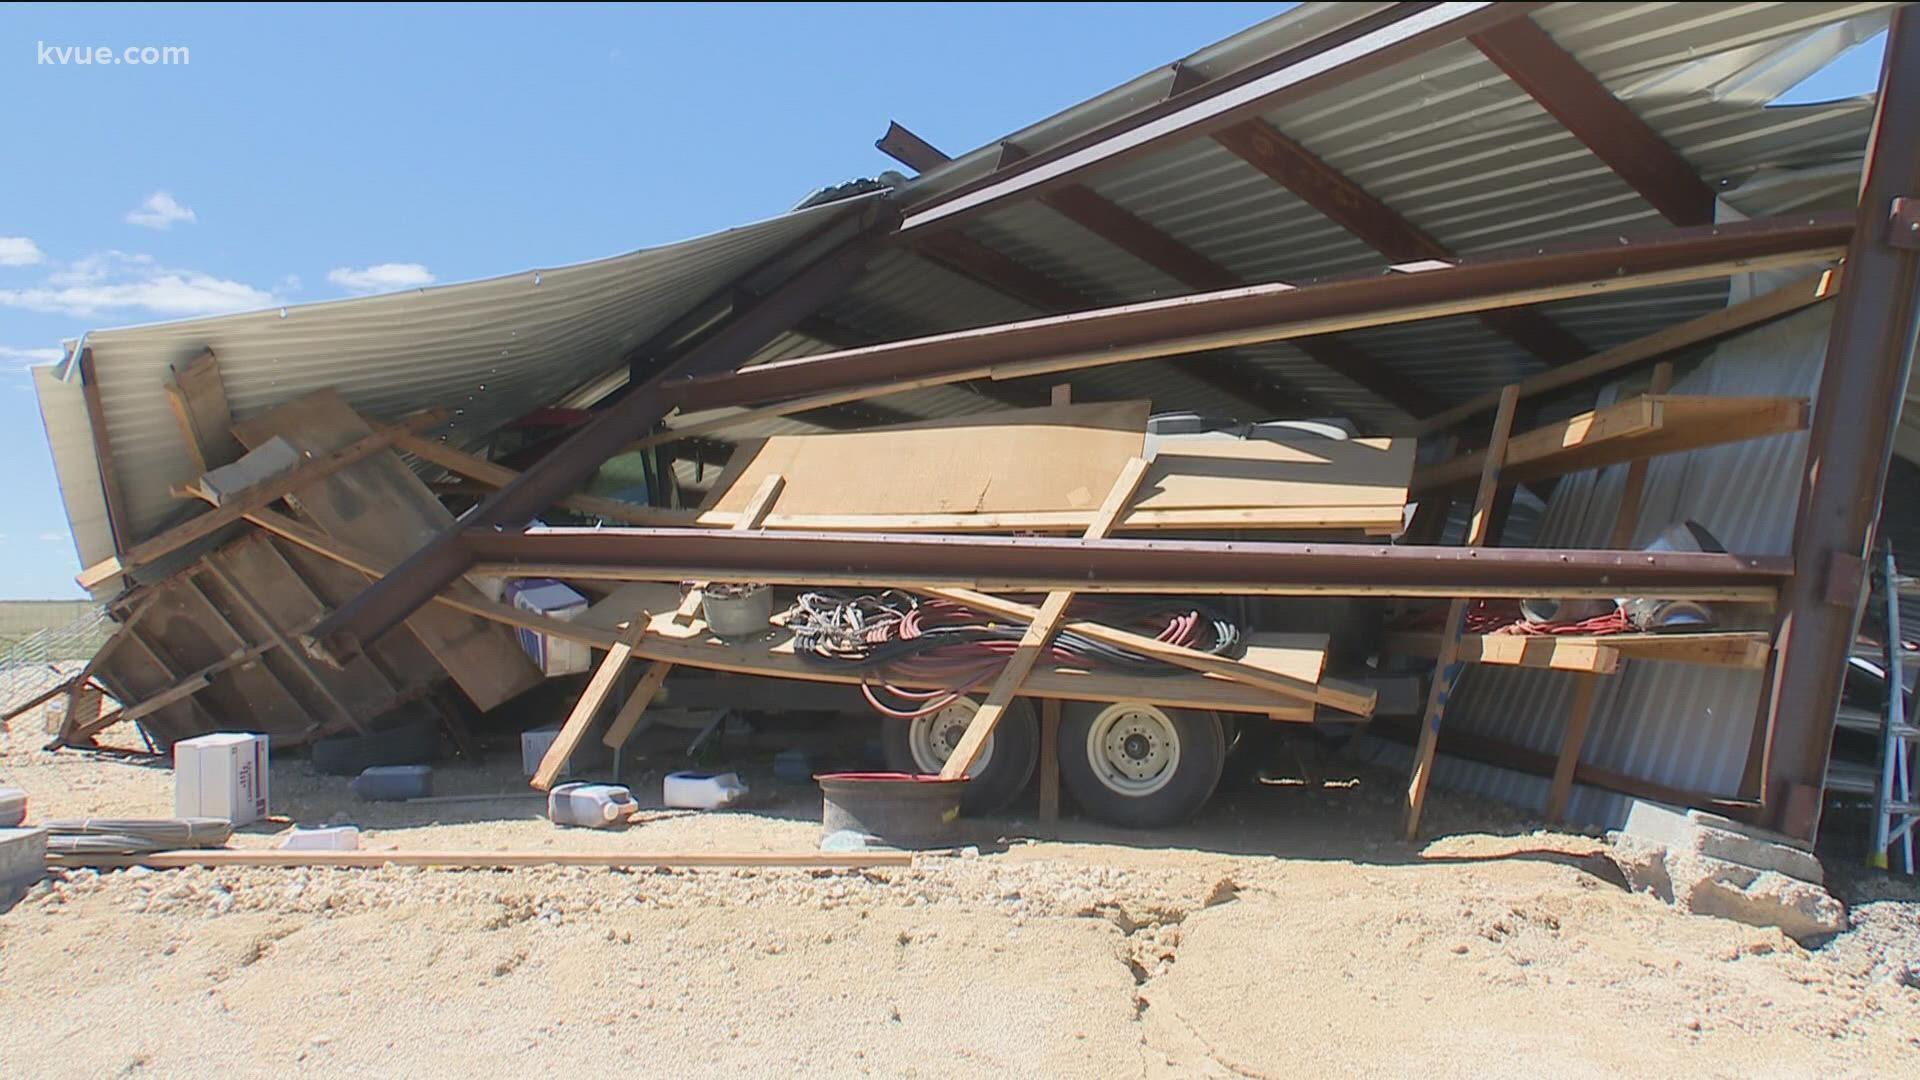 One homeowner said pieces of her shed were picked up and carried hundreds of yards.